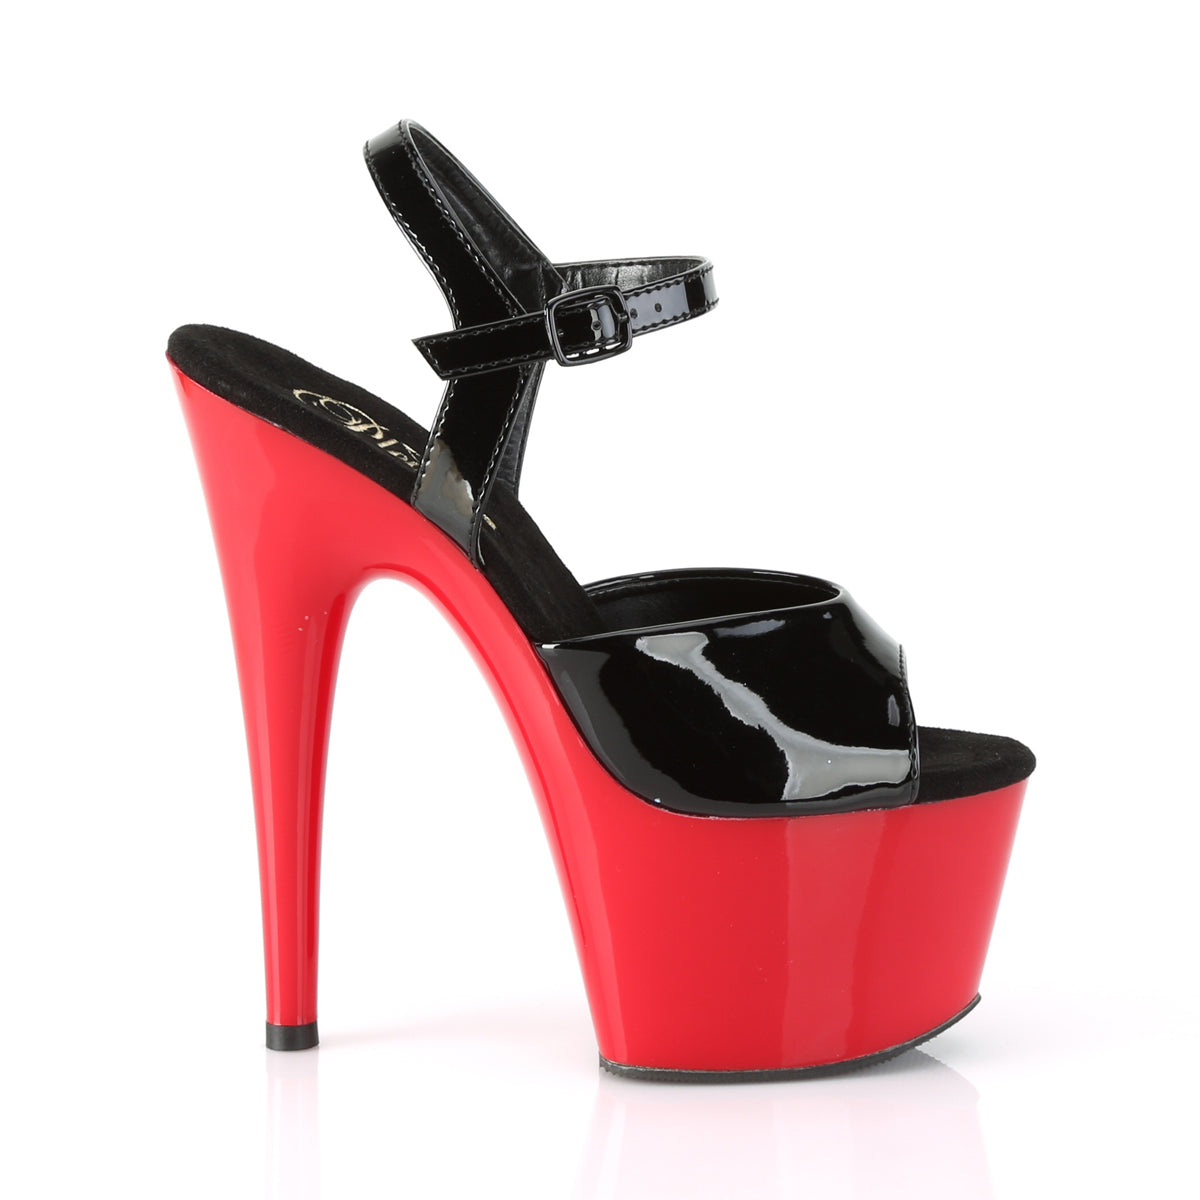 ADORE-709 Patent Black & Red Open Toe High Heels